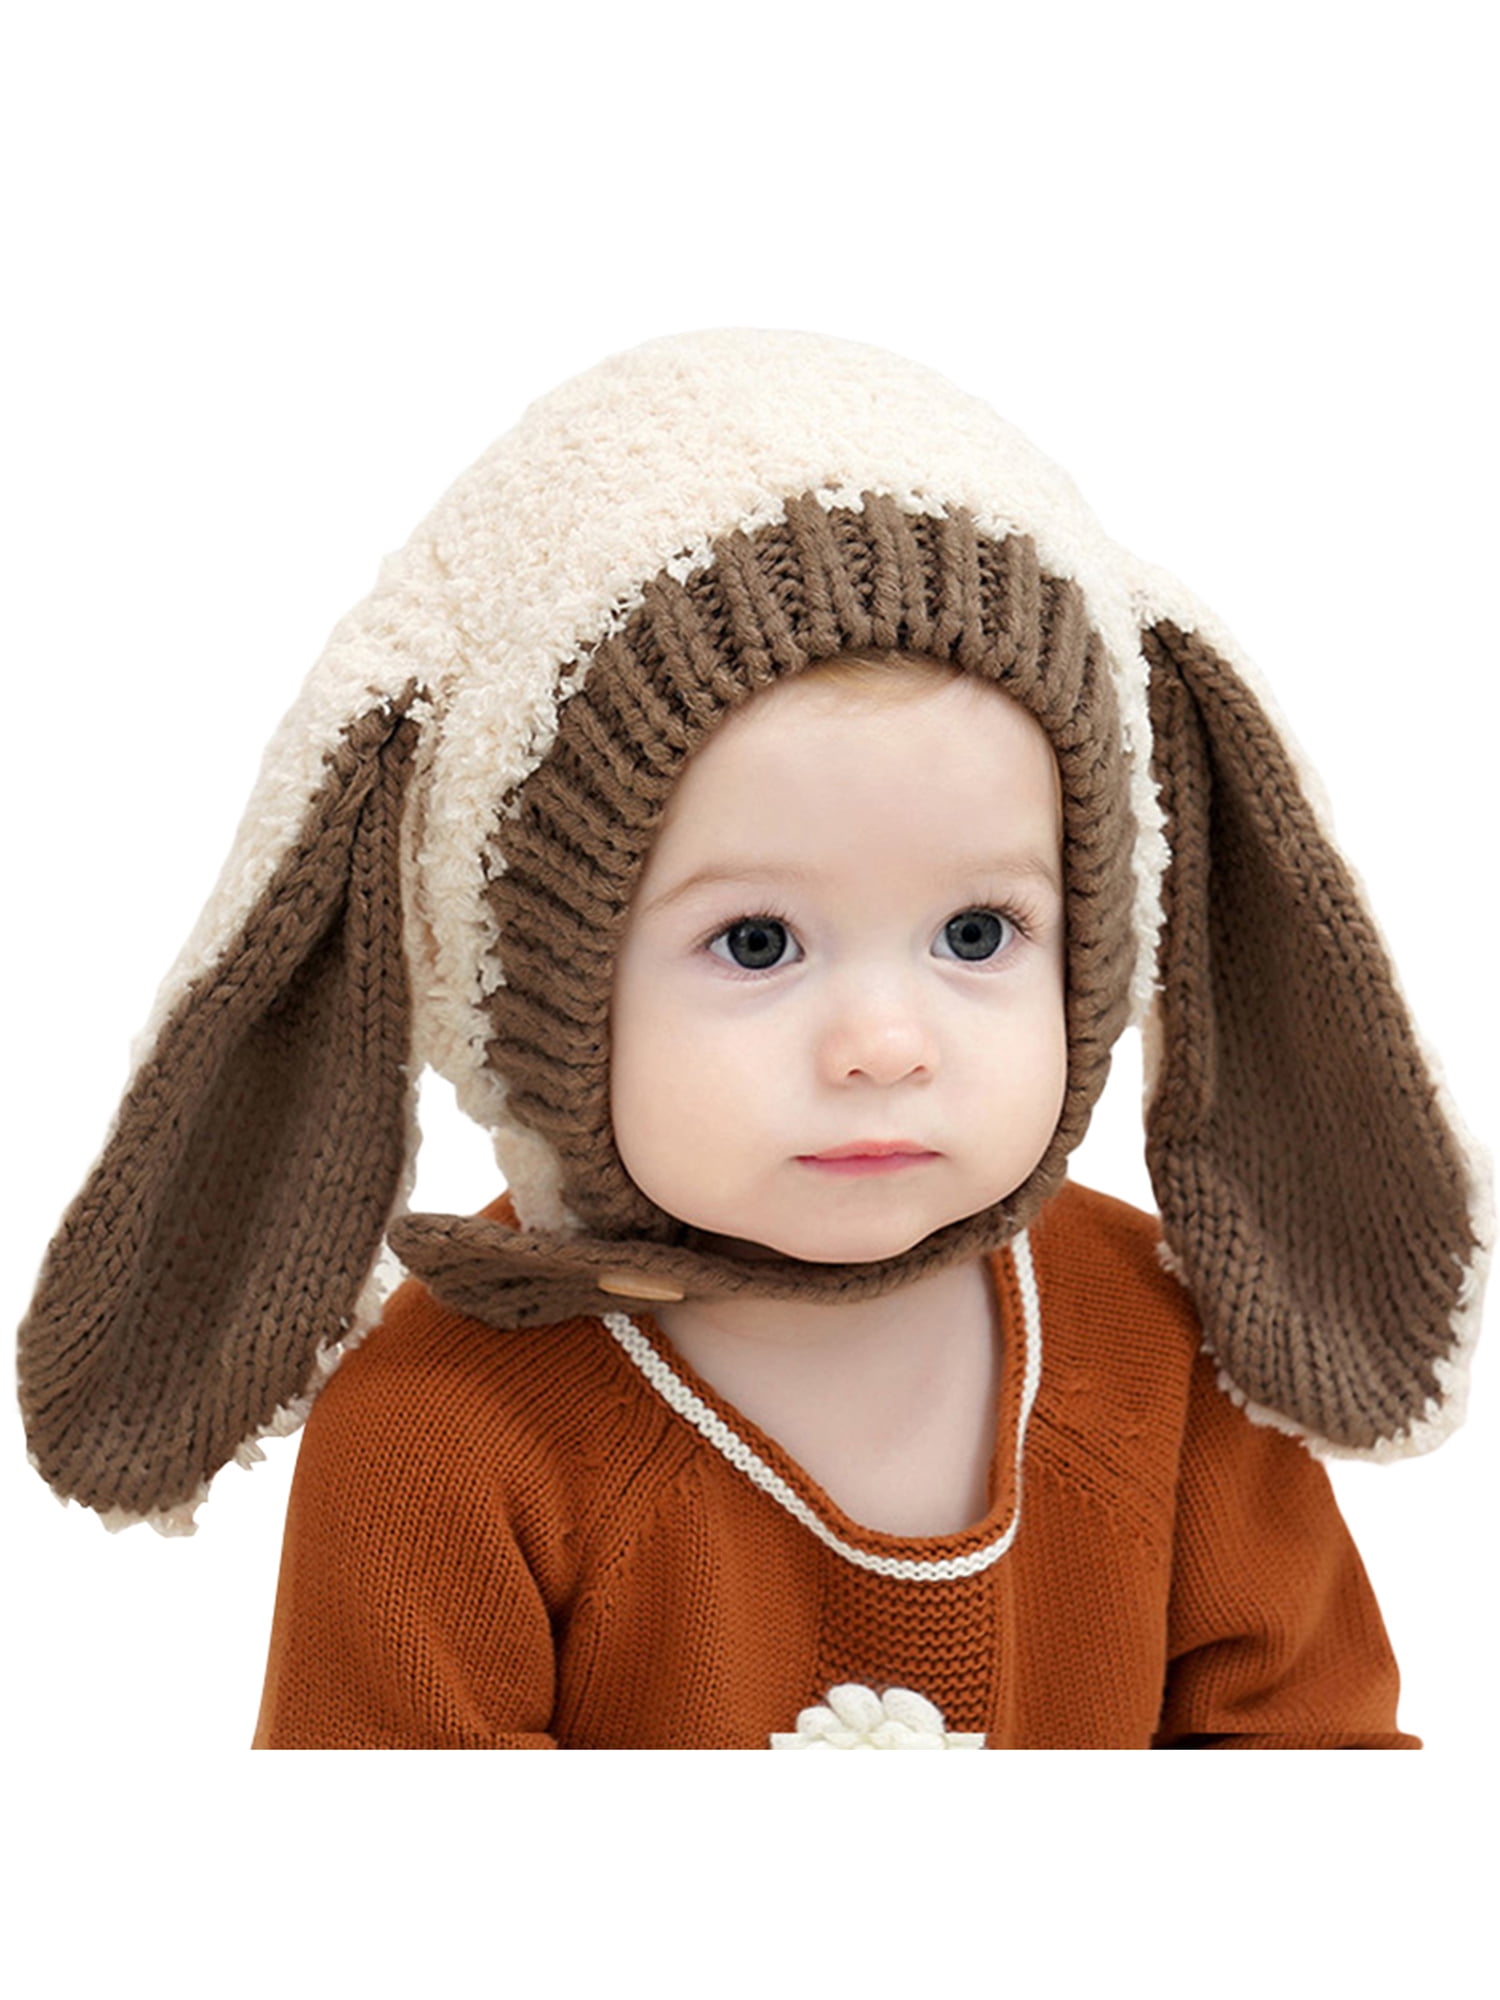 CROCHET KITTY CAT EAR FLAP BABY HAT KNIT  infant toddler beanie photo prop USA 